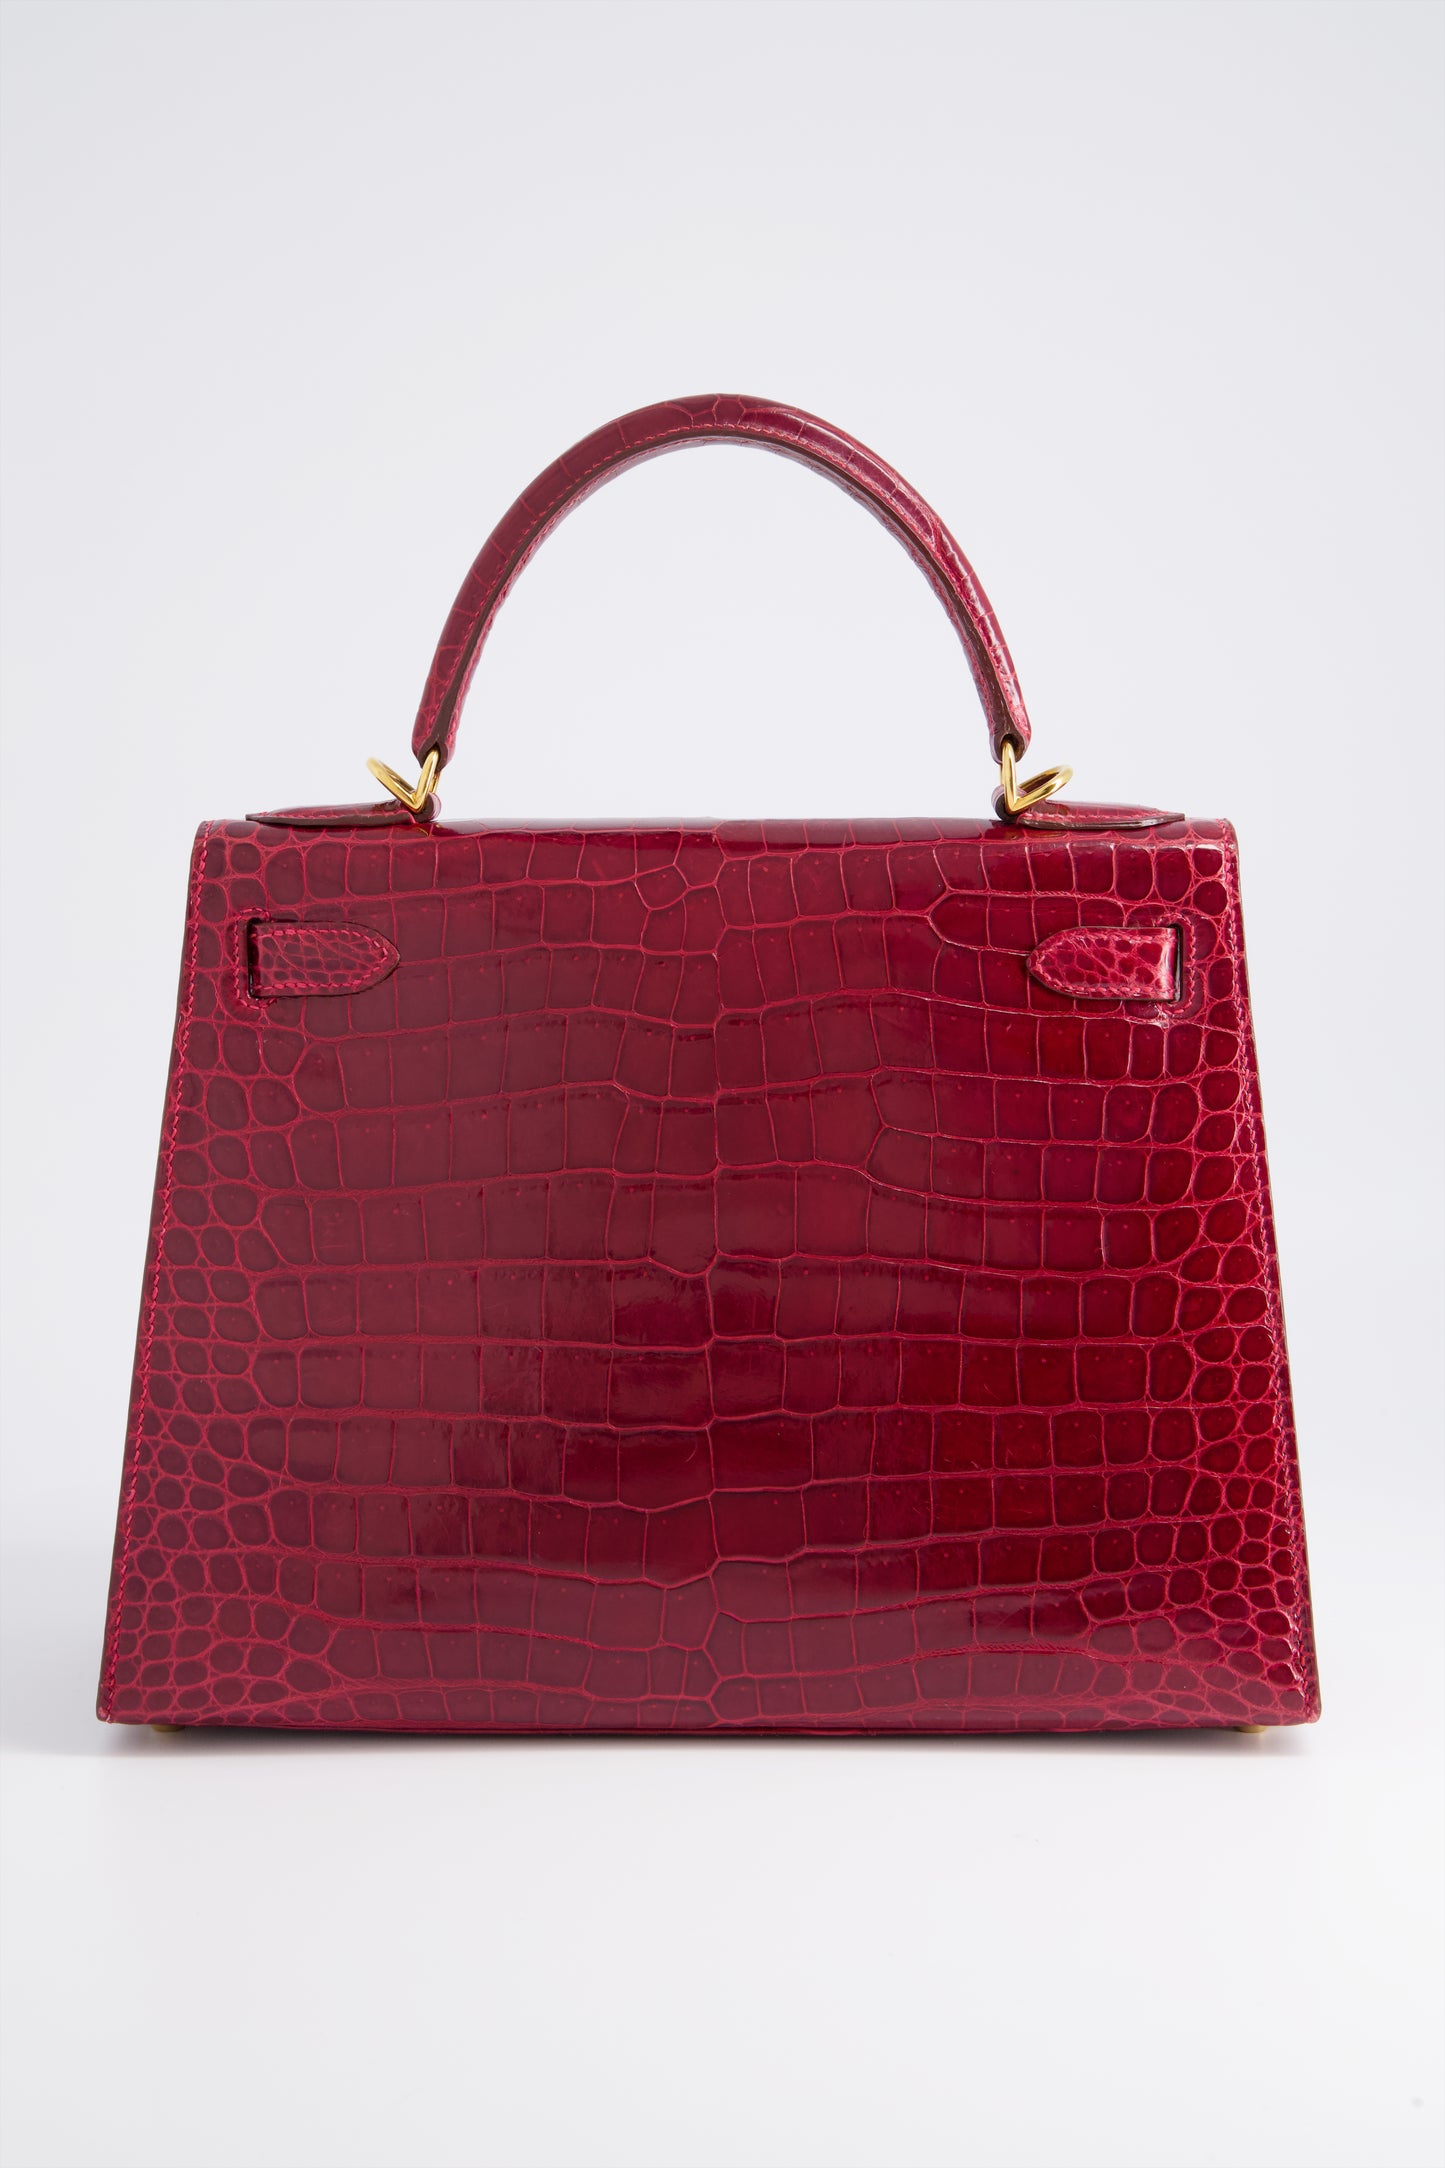 *RARE* Hermes Kelly 28 Rouge VIF Sellier Crocodile Porosus Leather With Gold Hardware